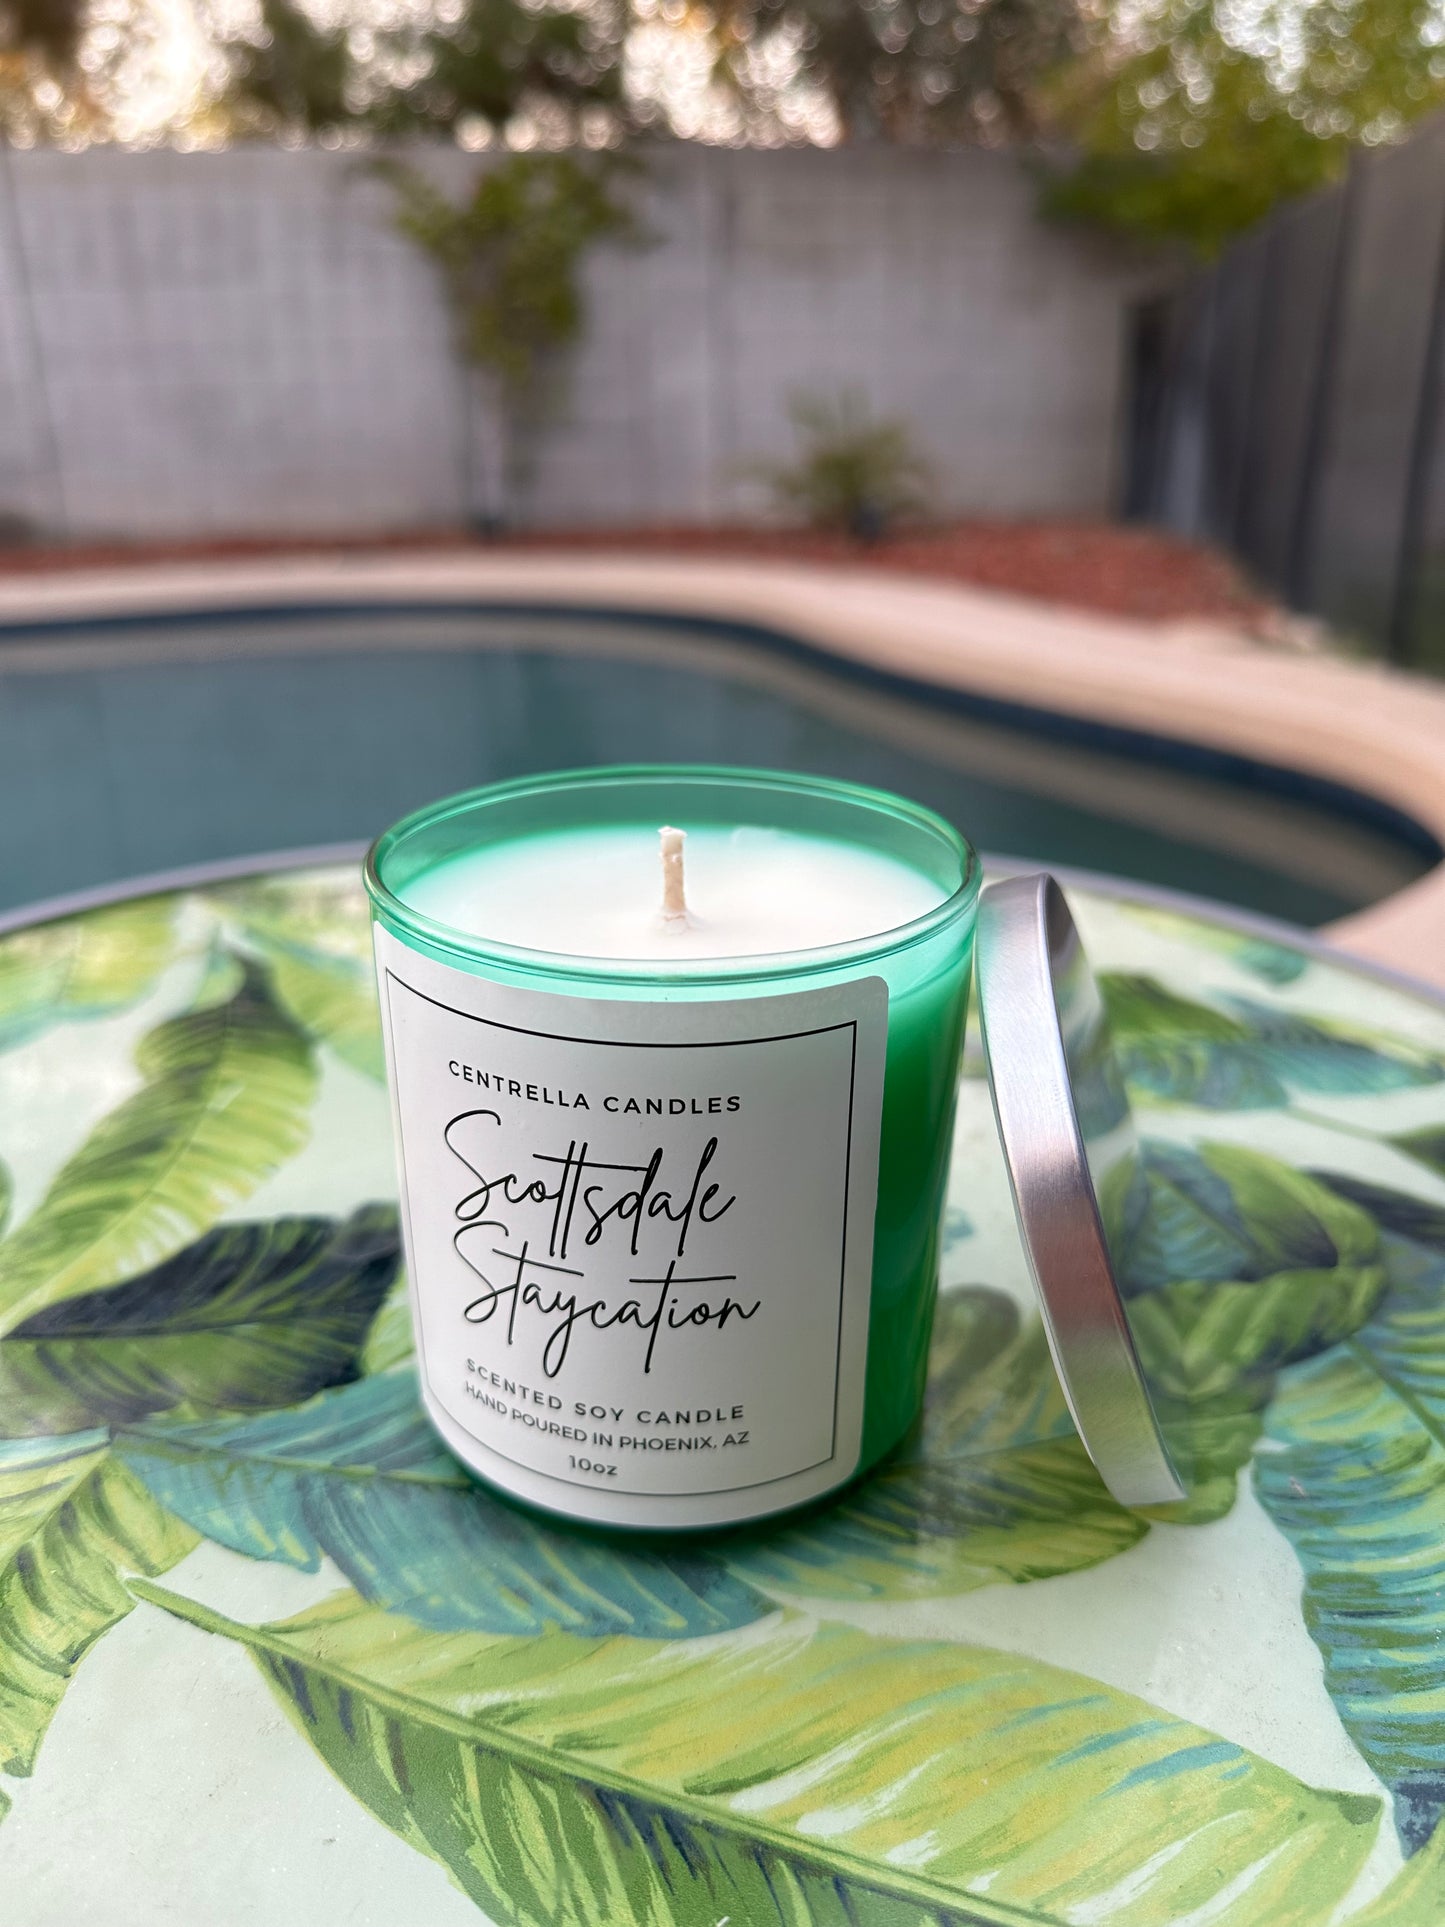 Scottsdale Staycation Soy Candle